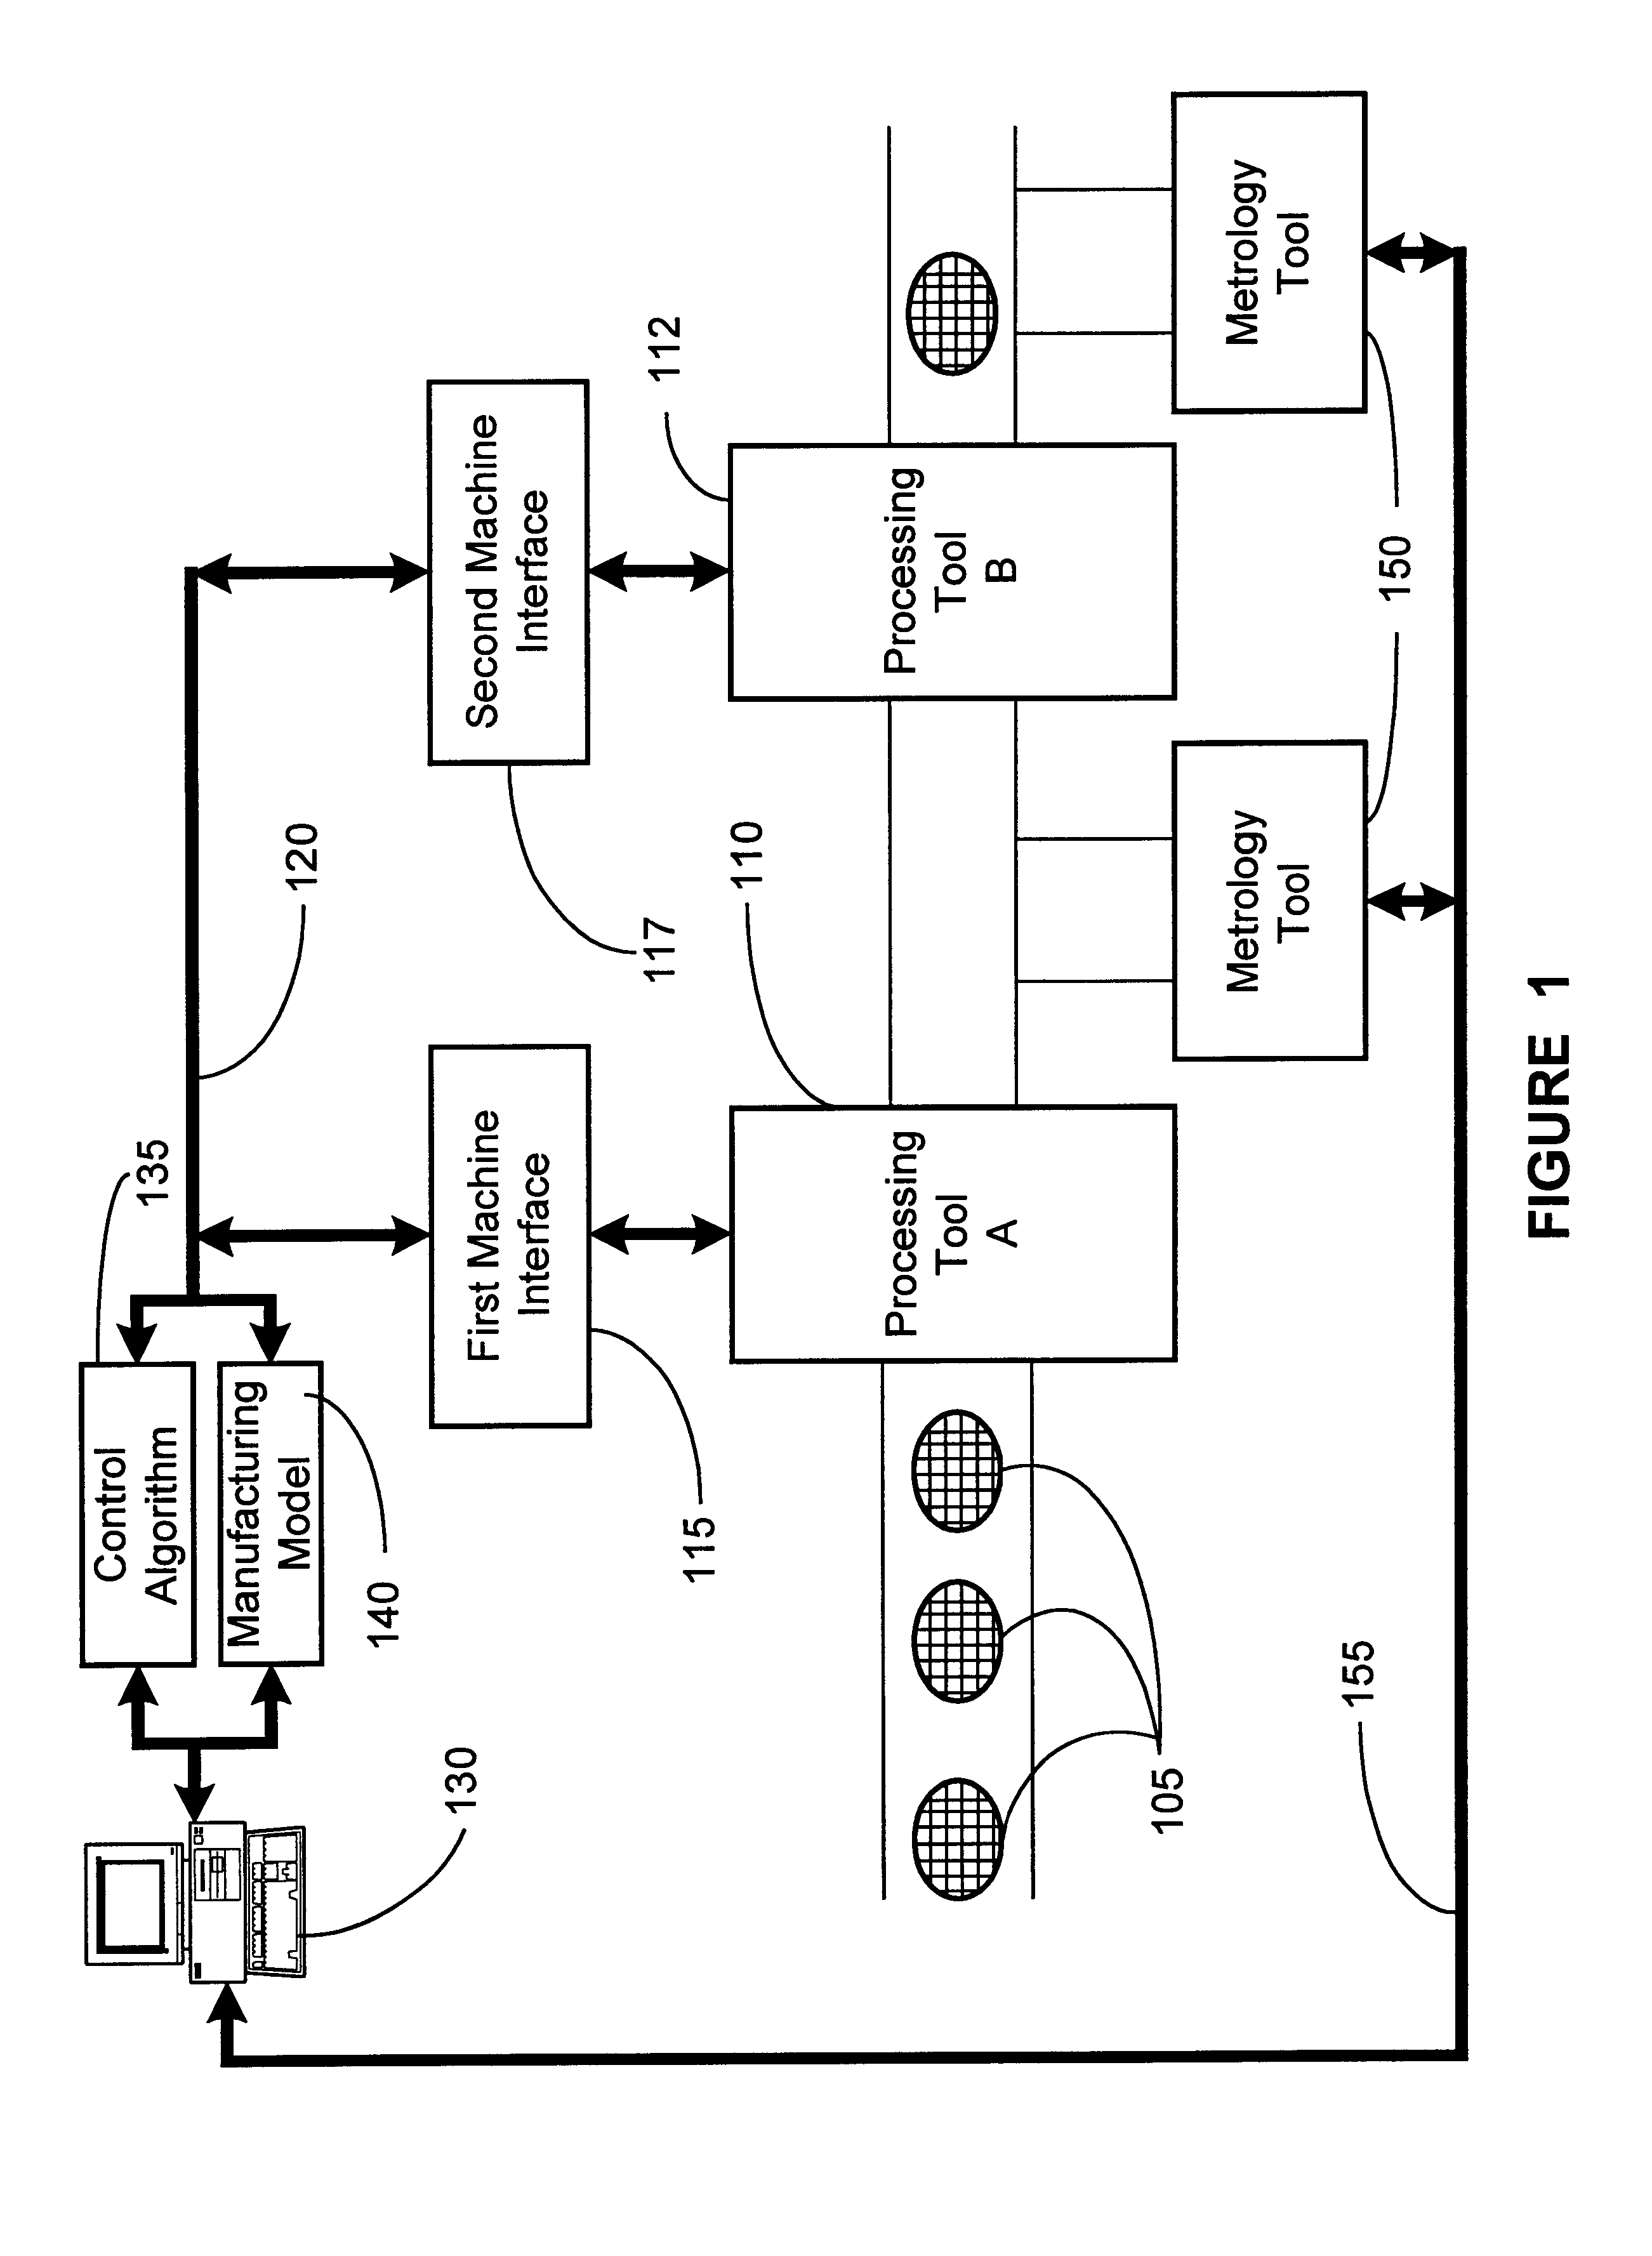 Method and apparatus for control of critical dimension using feedback etch control